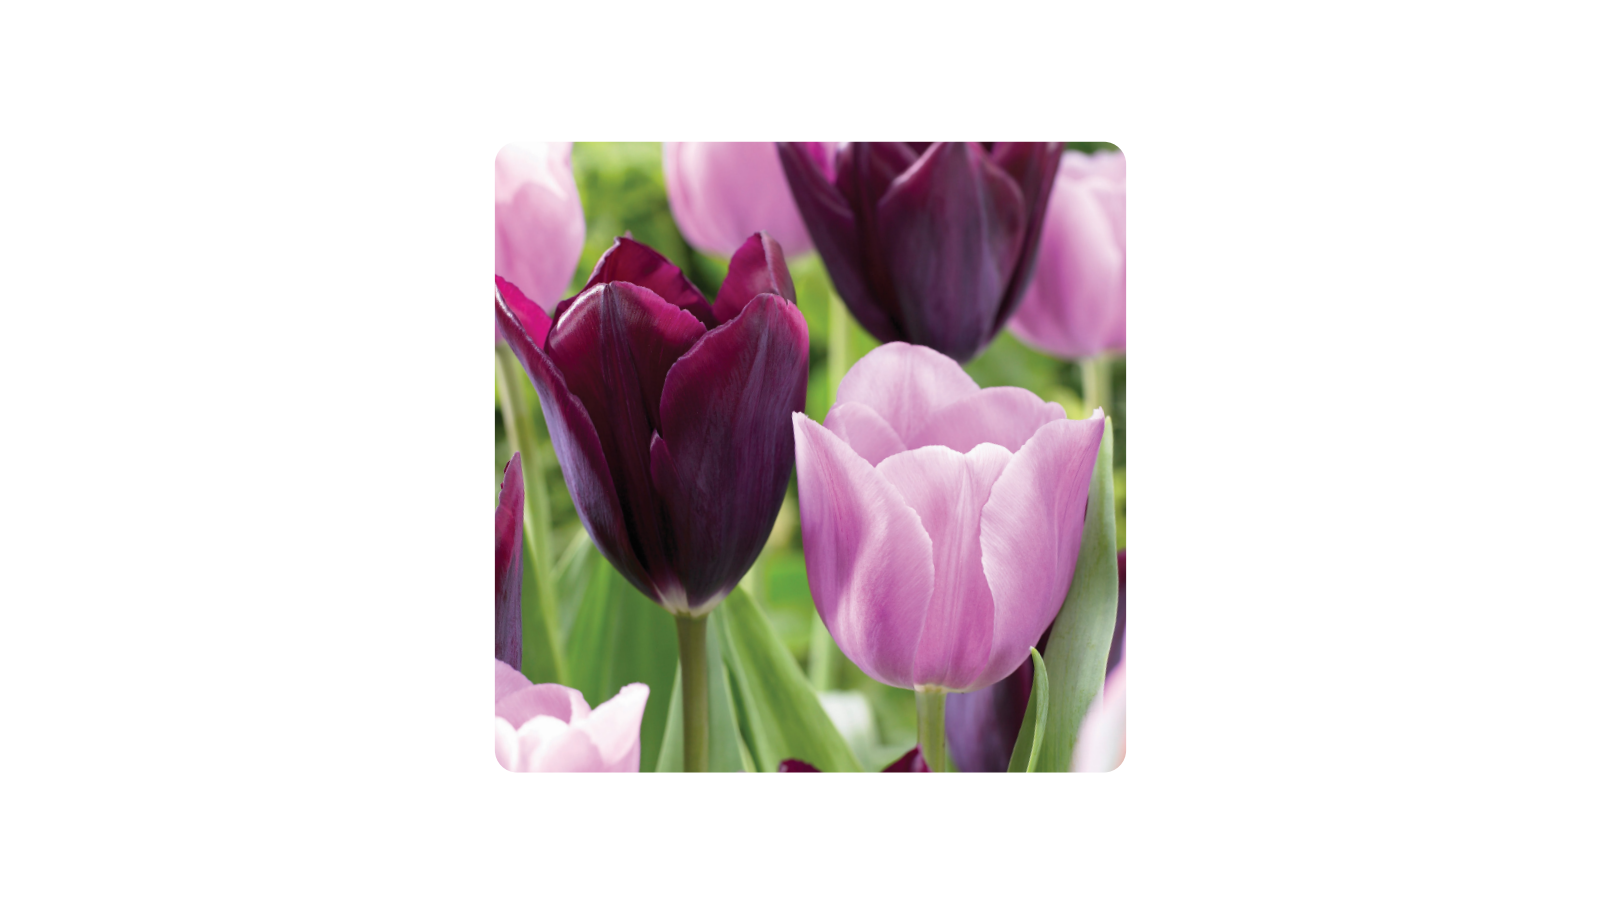 Miracle-Gro ECF-18-250 Purple and Pink Mixed Tulip Bulbs